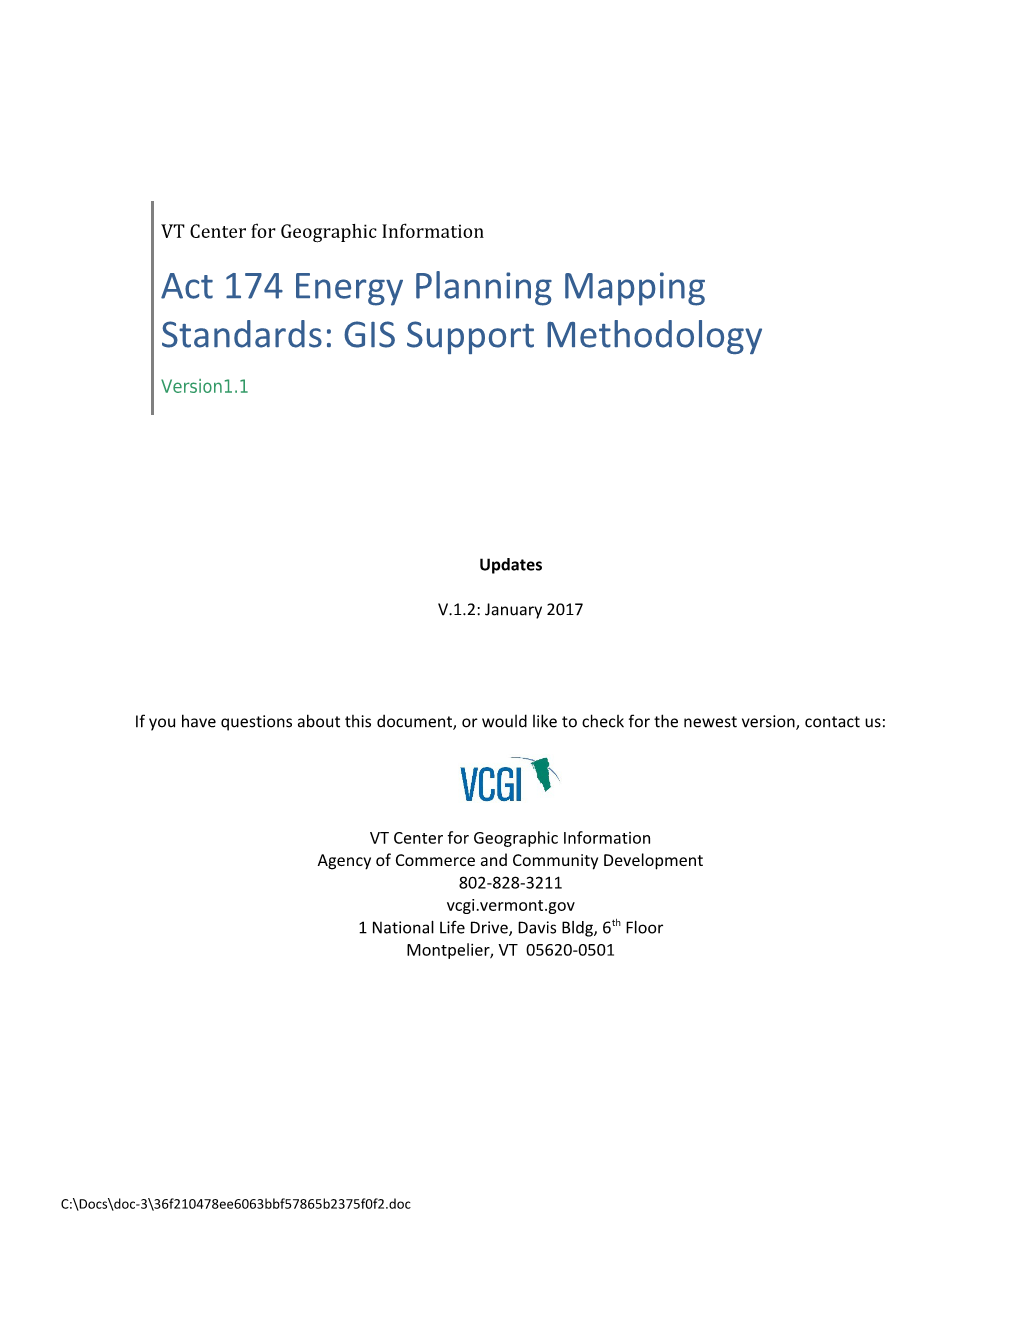 Act 174 Energy Planning Mapping Standards: GIS Support Methodology